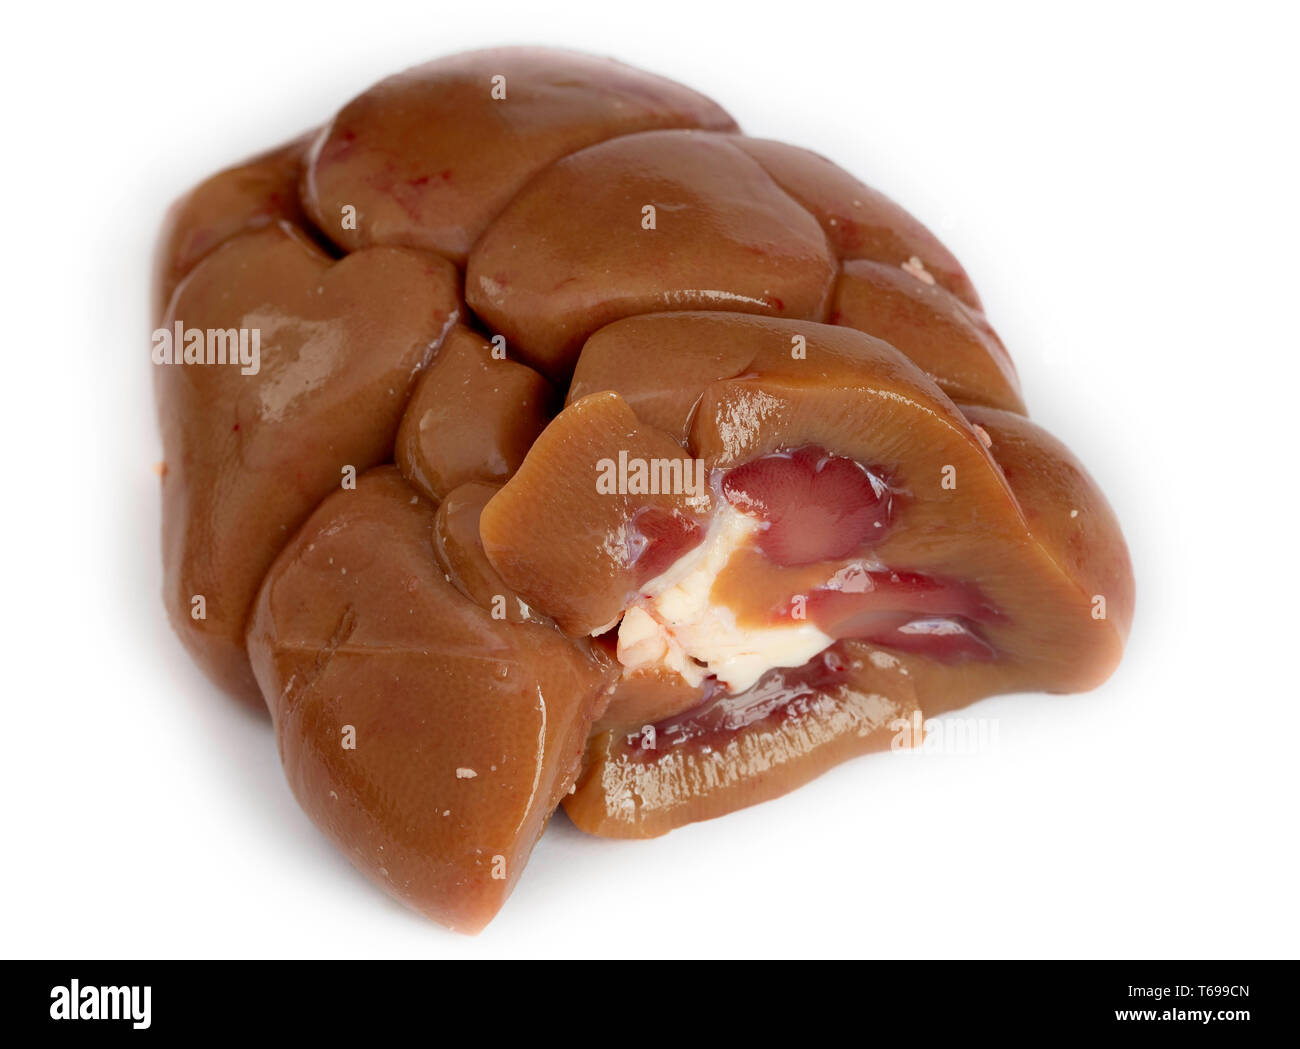 Raw beef kidney, also called ox kidney, over a white background. Stock Photo